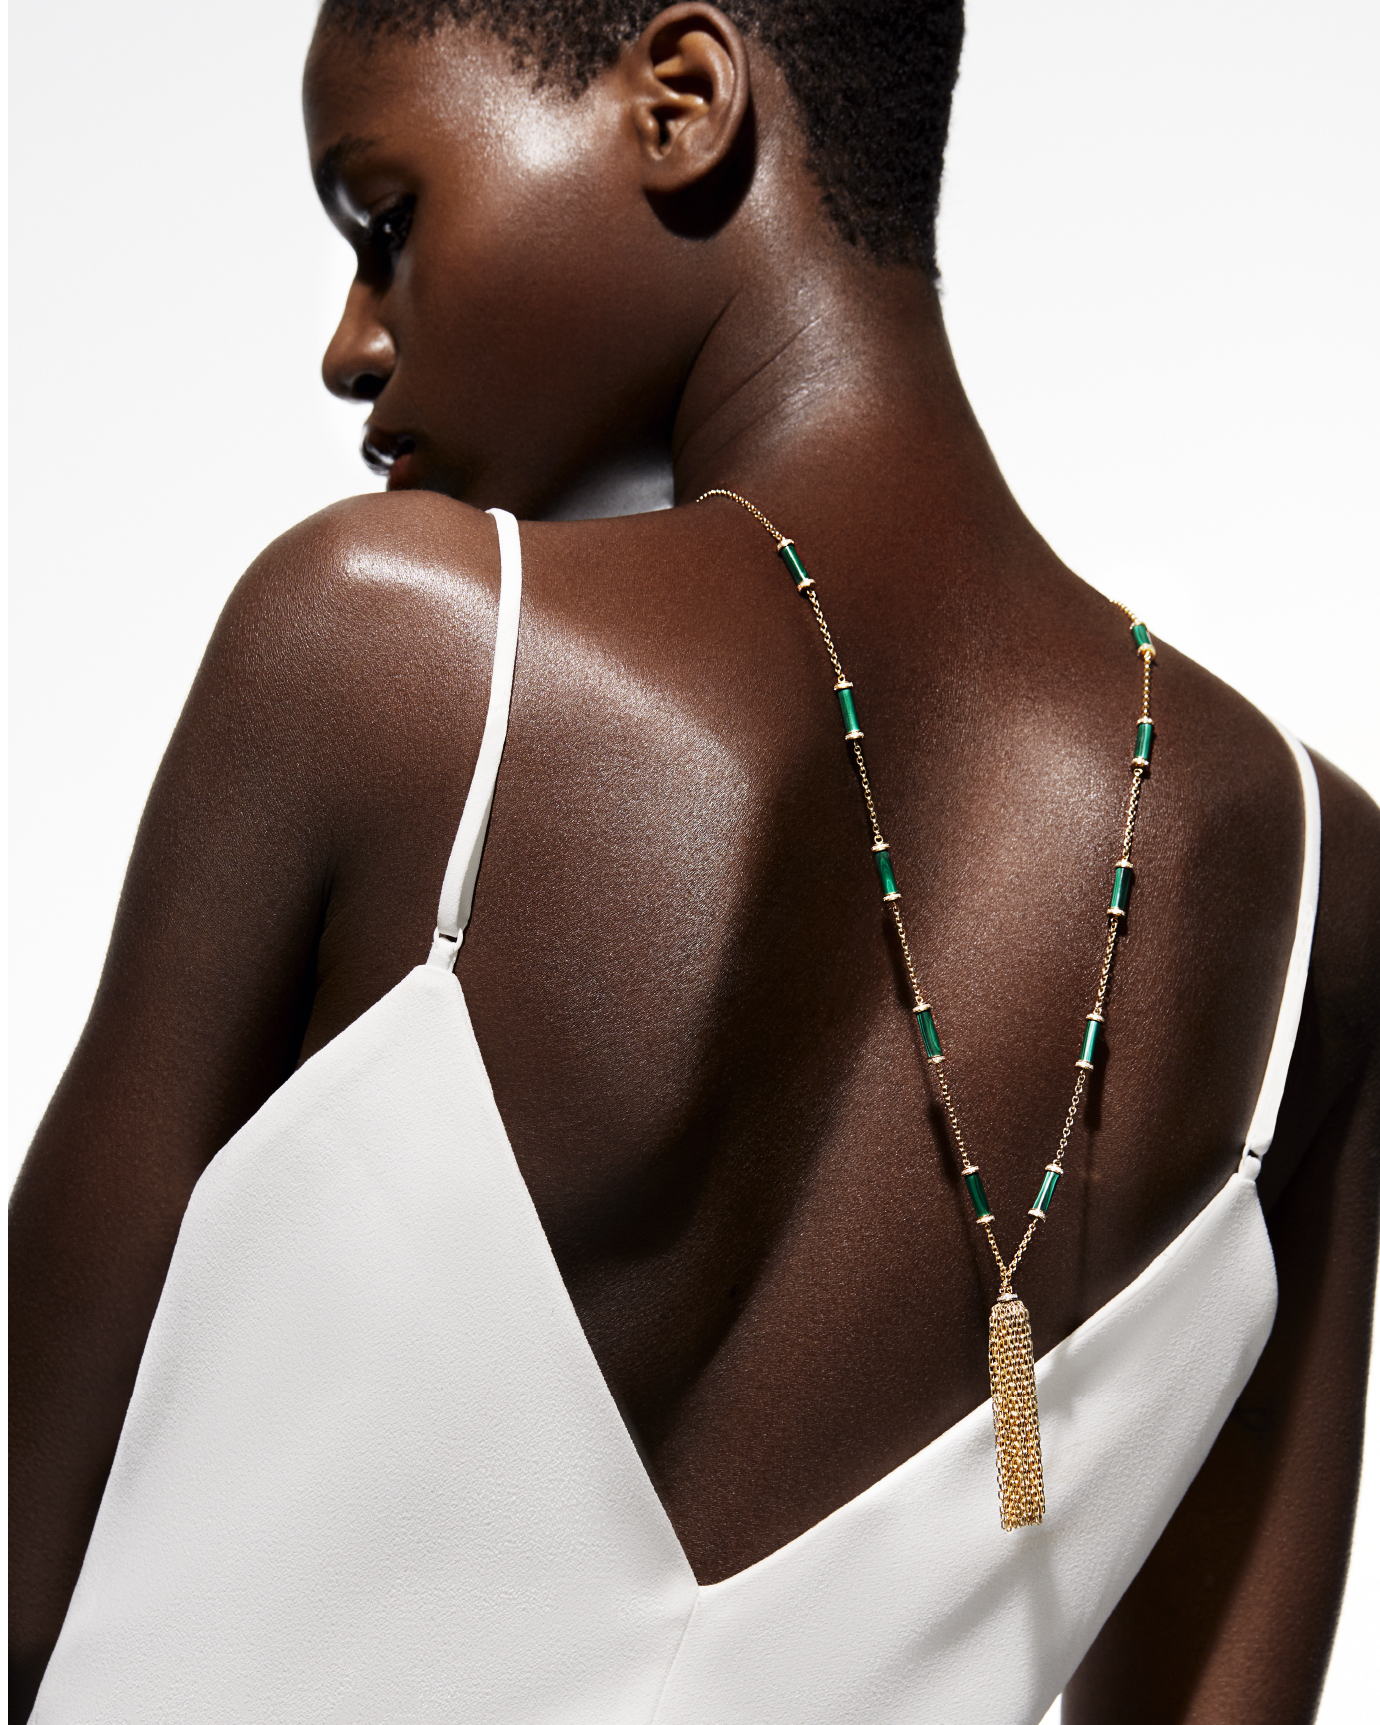 BEAUTY OF NATURE, LONG NECKLACE. – SHWAH